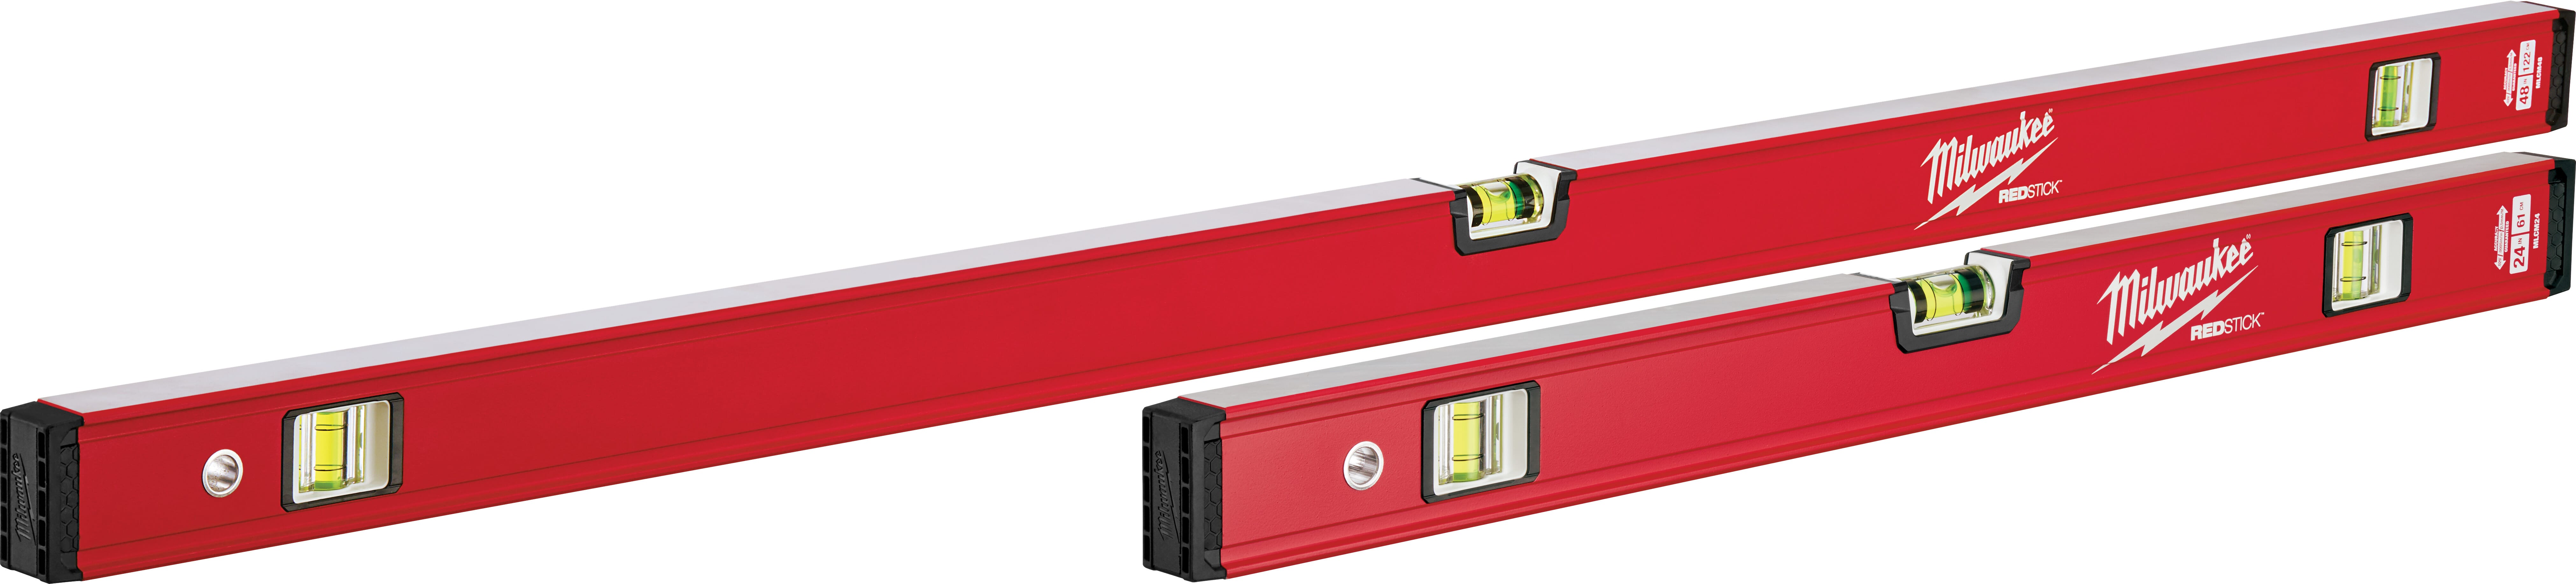 Milwaukee® REDSTICK™ MLCMS48 Compact Box Level, 48 in L, 3 Vials, Metal/Polymer, (1) Level/(2) Plumb Vial Position, 0.0005 in Accuracy